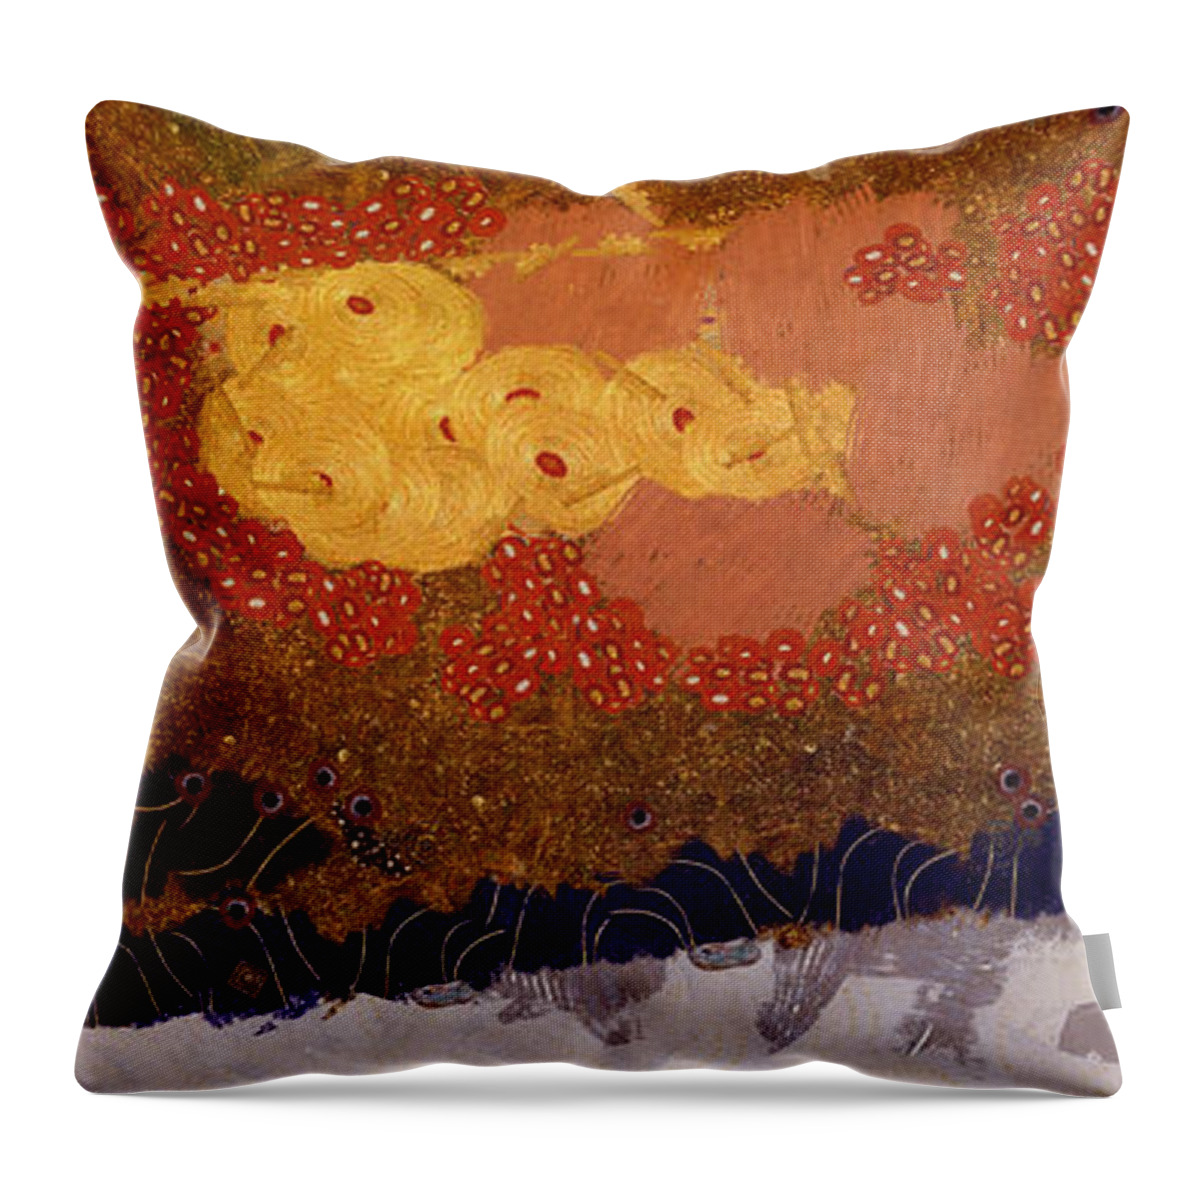 Abstract Throw Pillow featuring the digital art Christmas background #4 by Michal Boubin